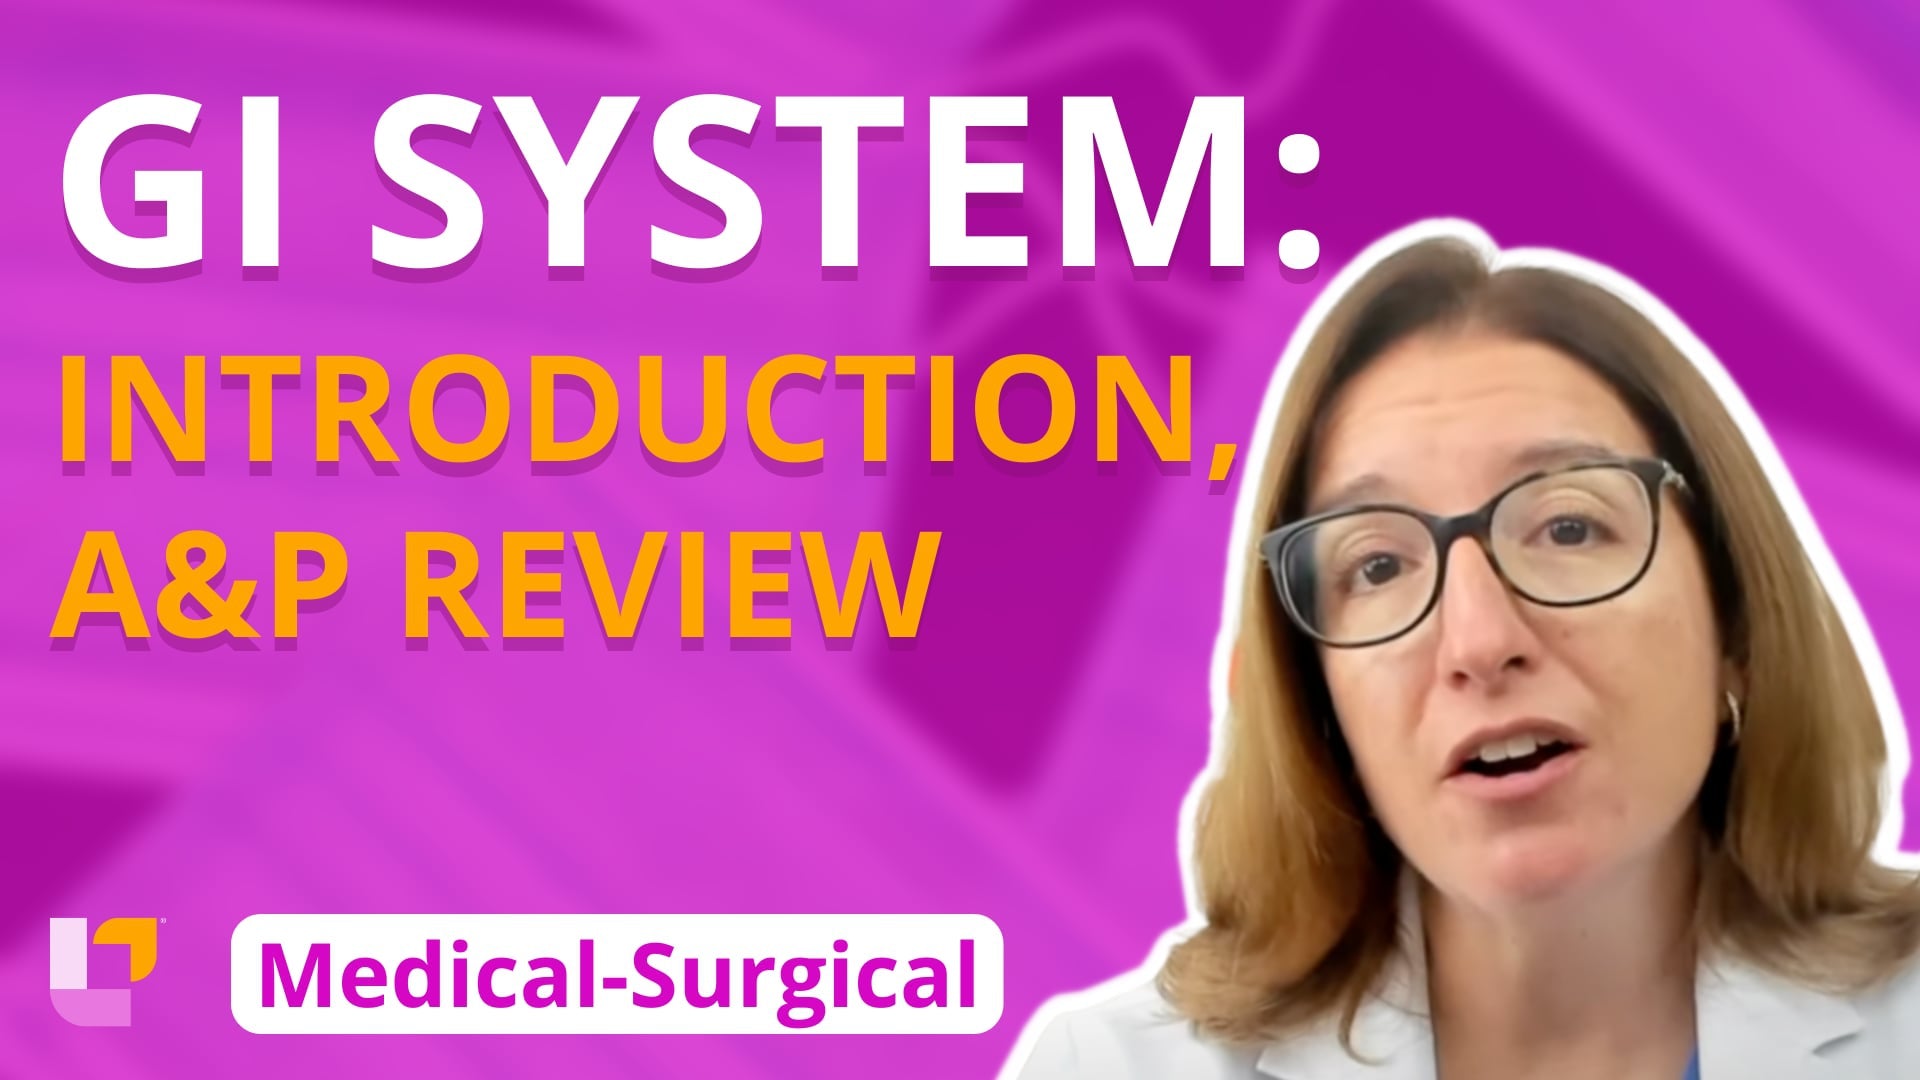 Med-Surg - Gastrointestinal System, part 1: Introduction, Anatomy and Physiology Review - LevelUpRN